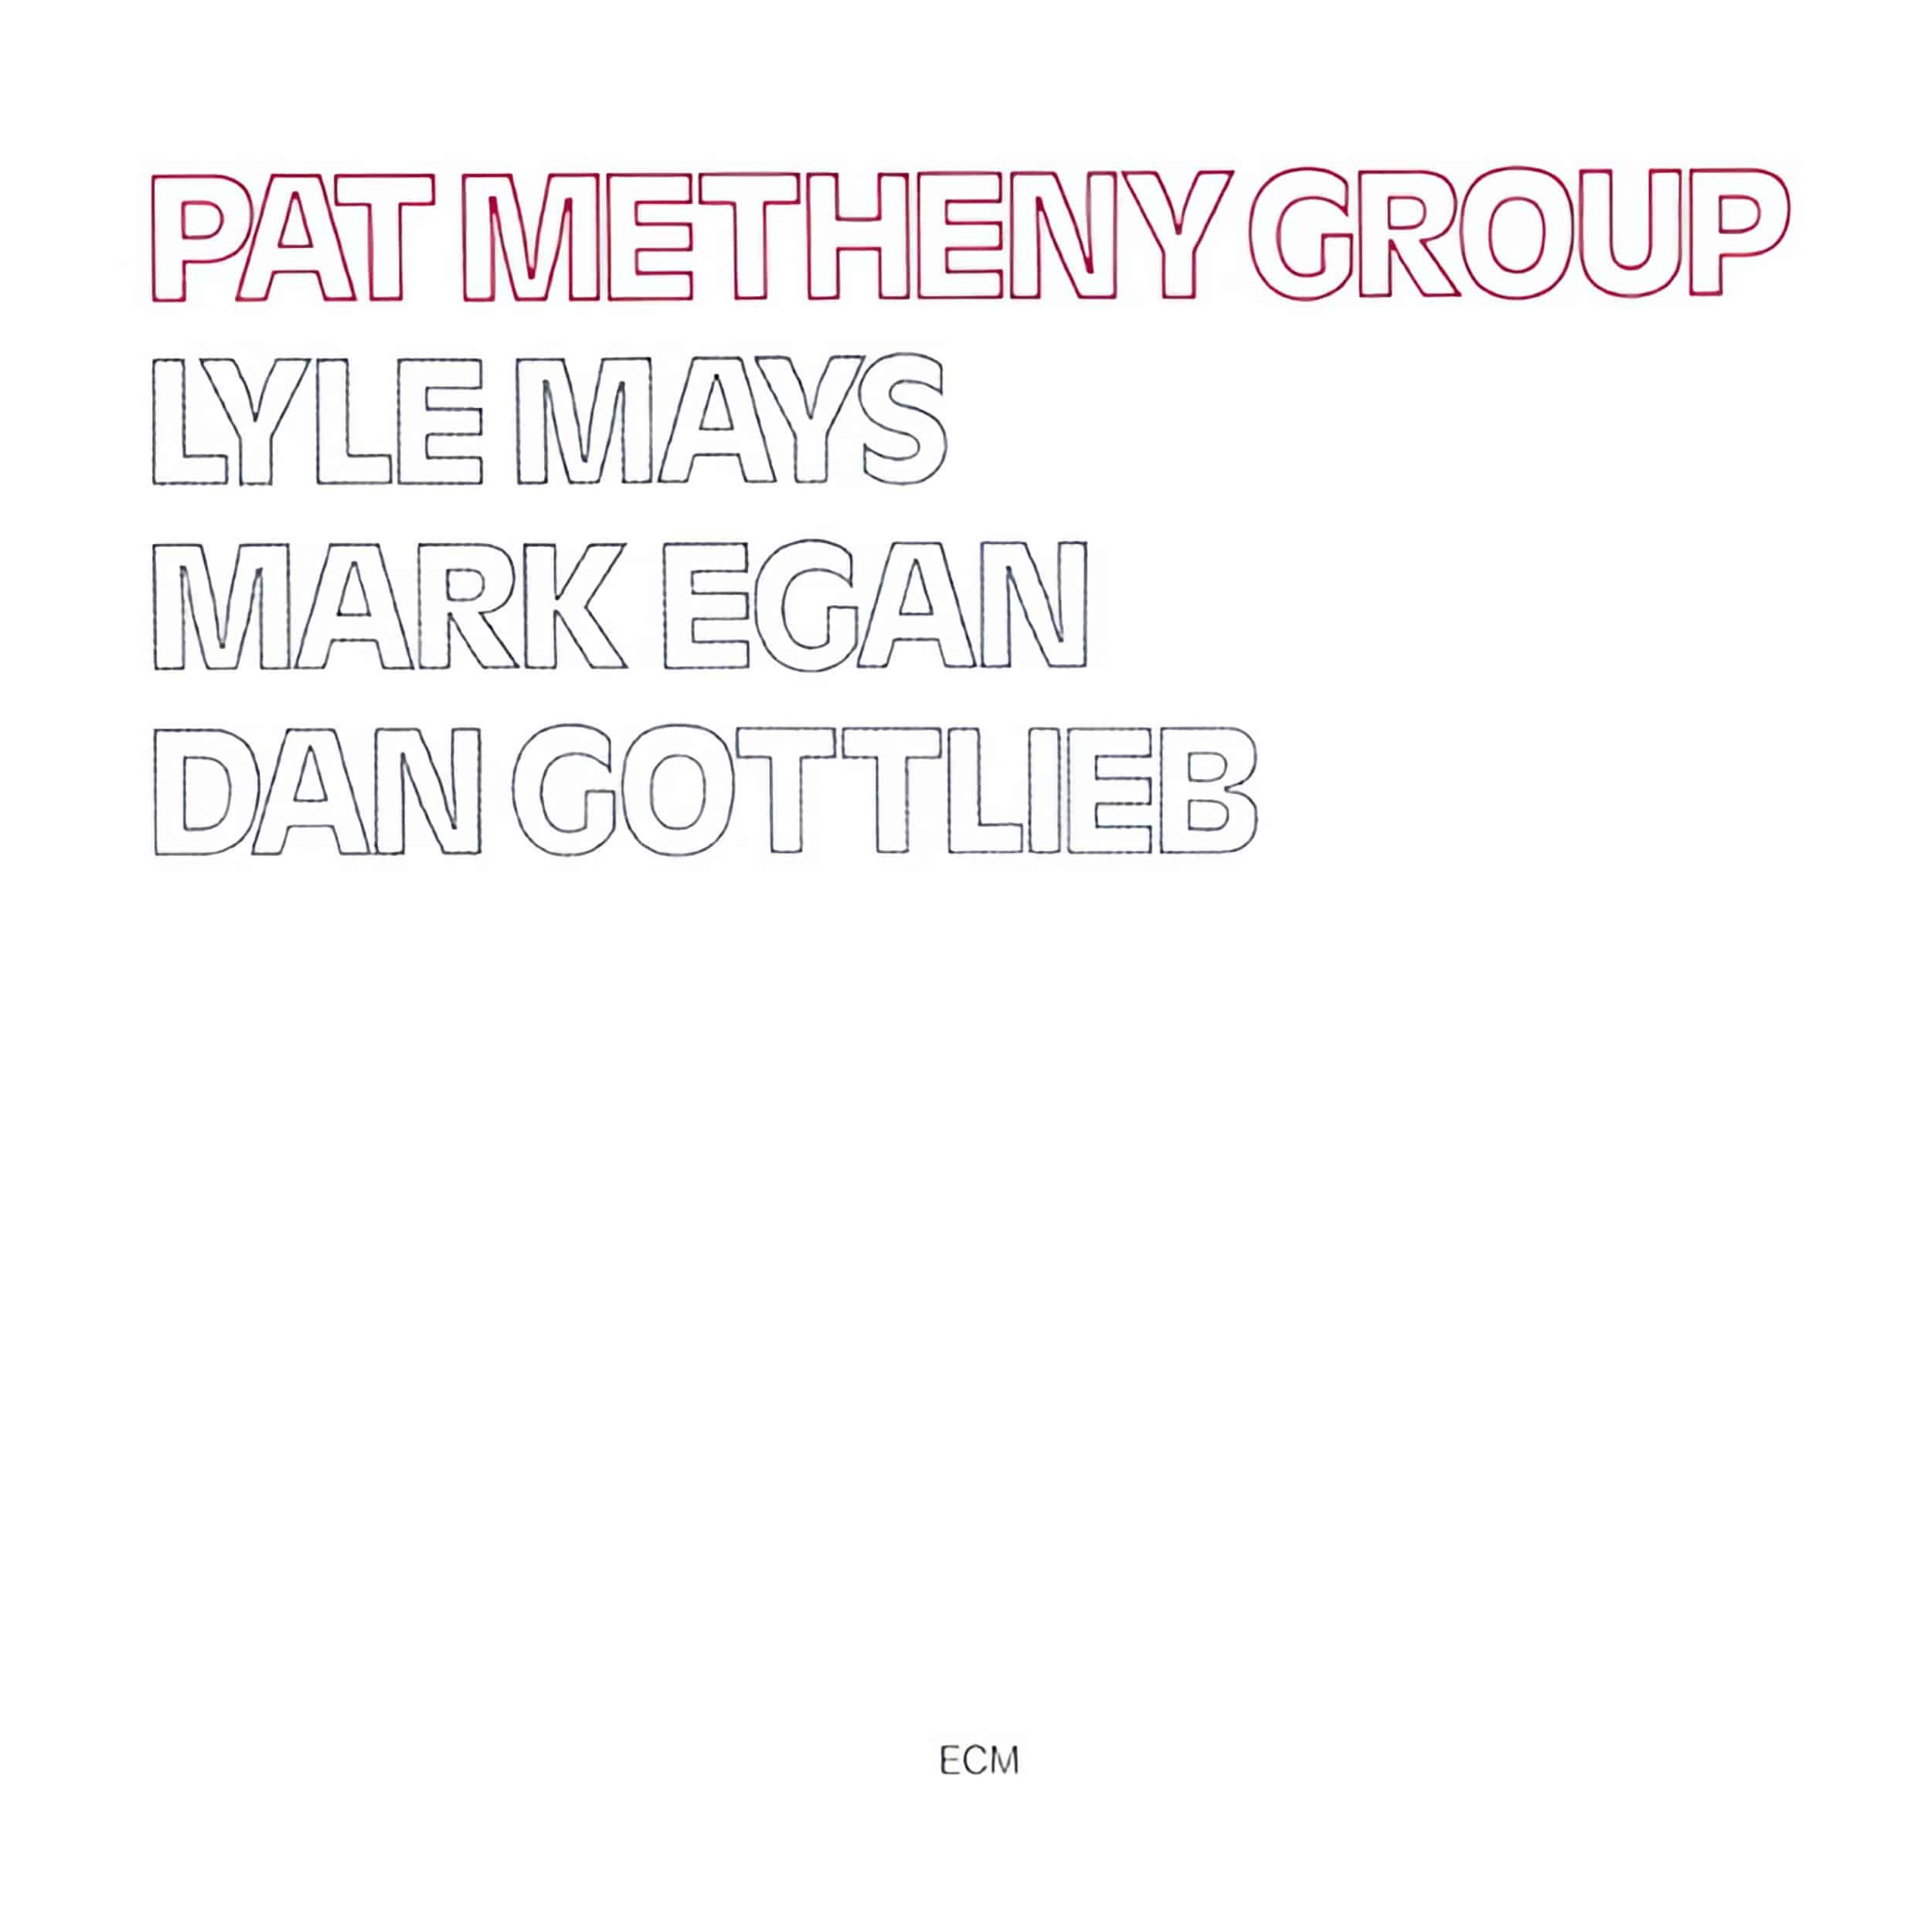 Pat Metheny Group –&nbsp;Self-Titled Album Cover